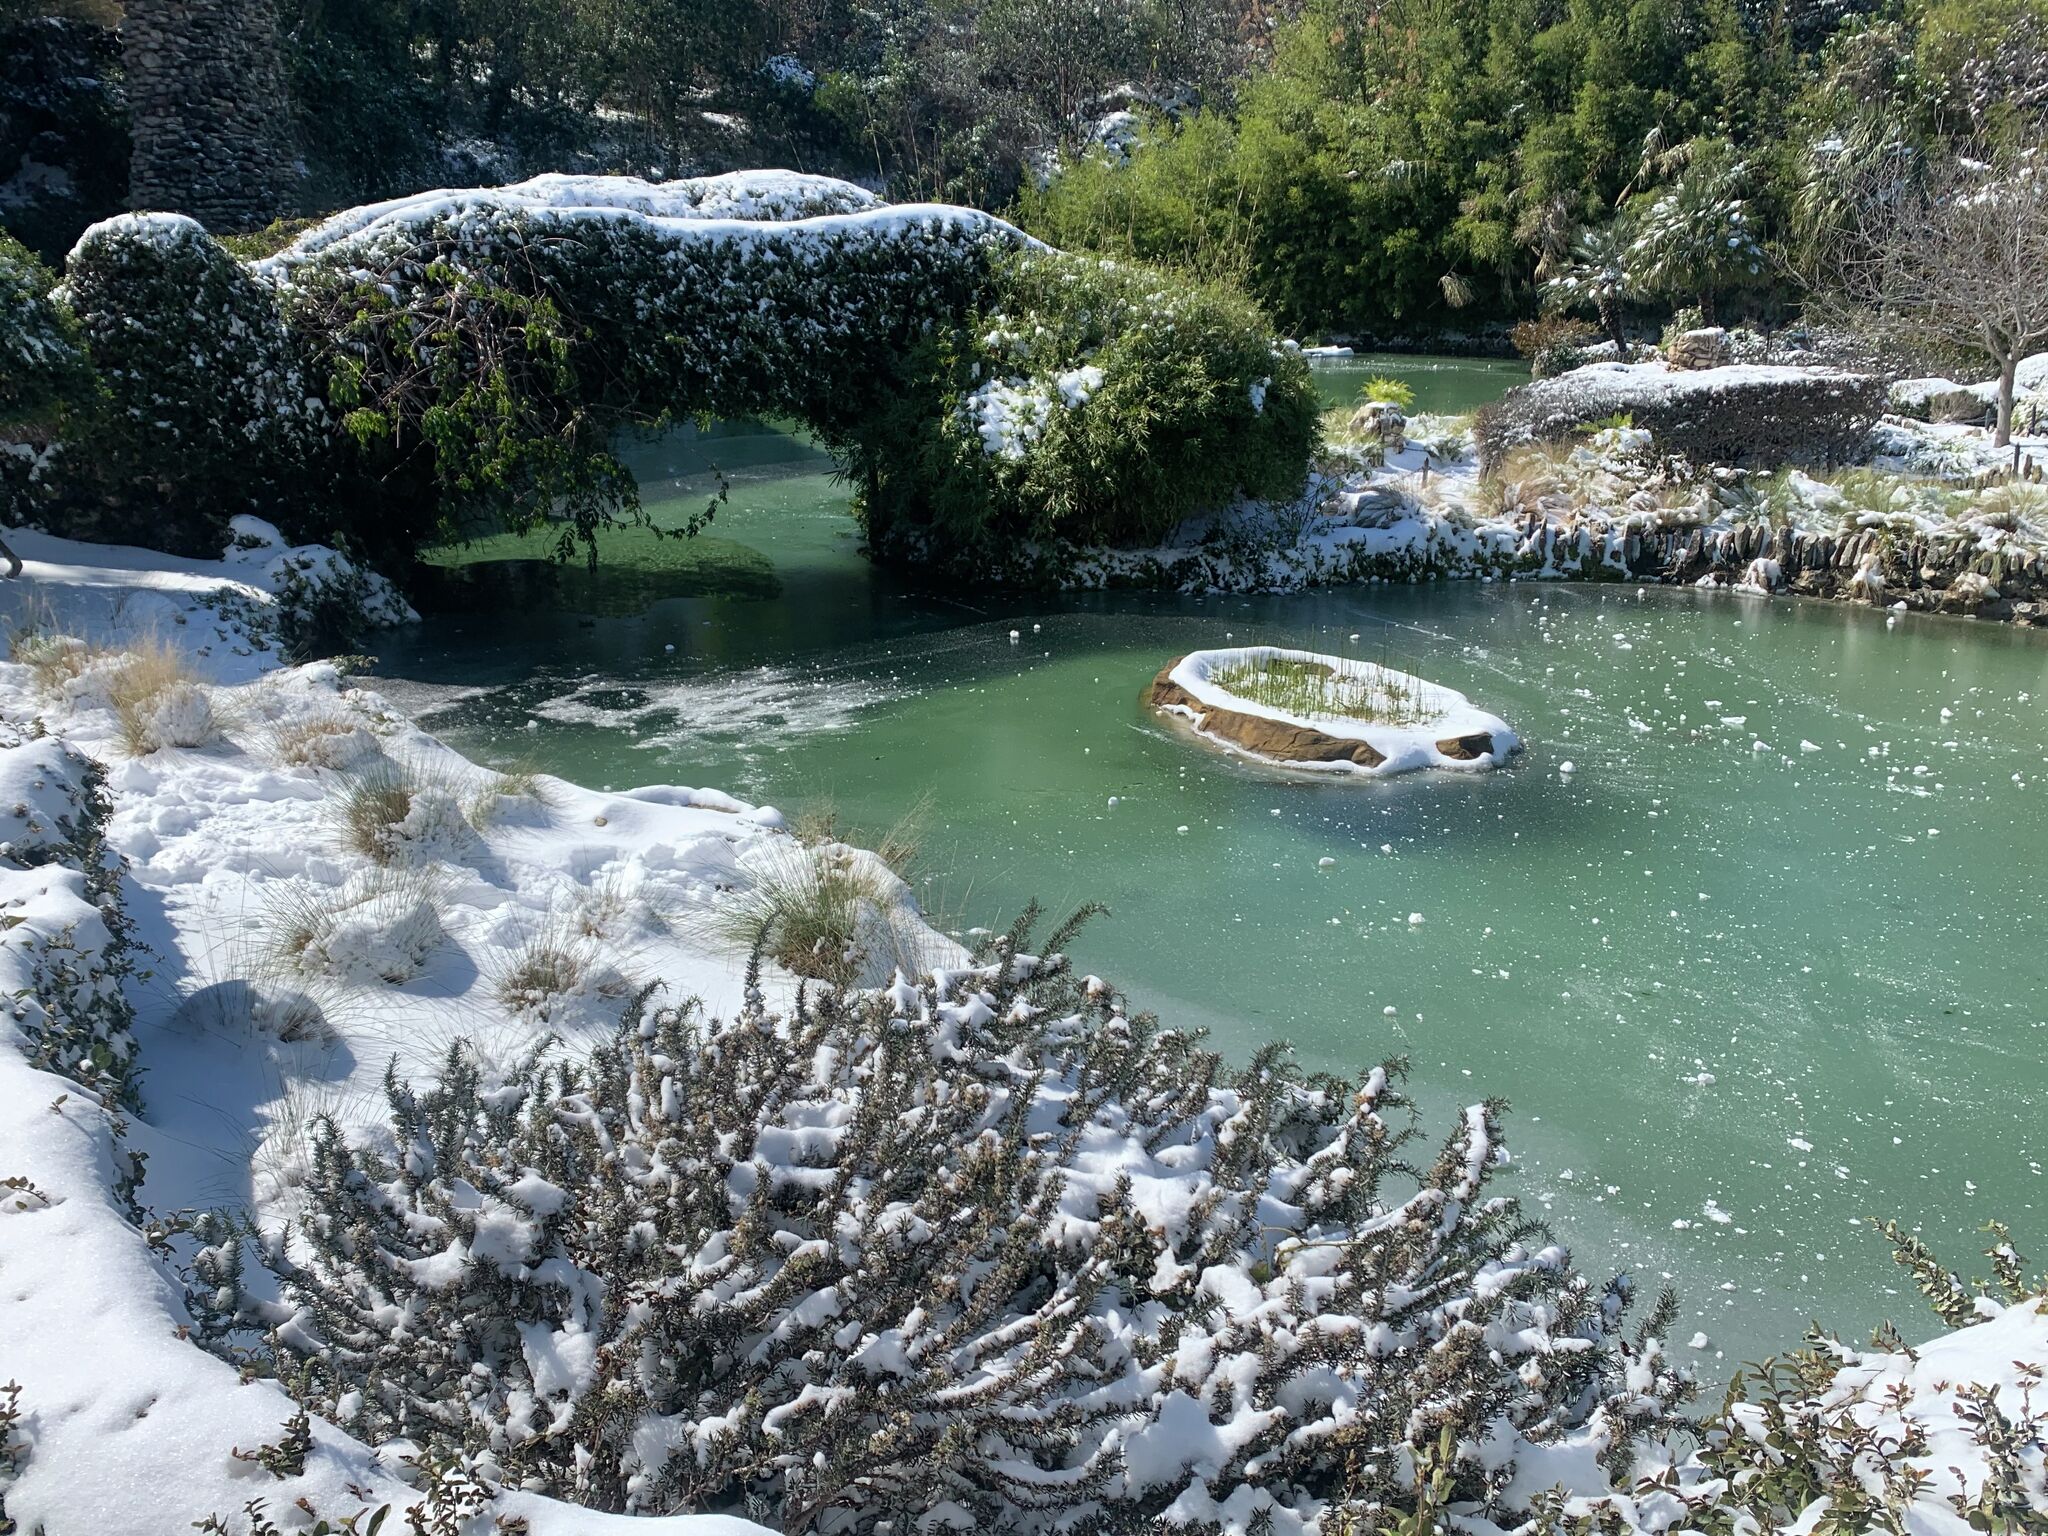 One year after the storm, photos show snowy San Antonio